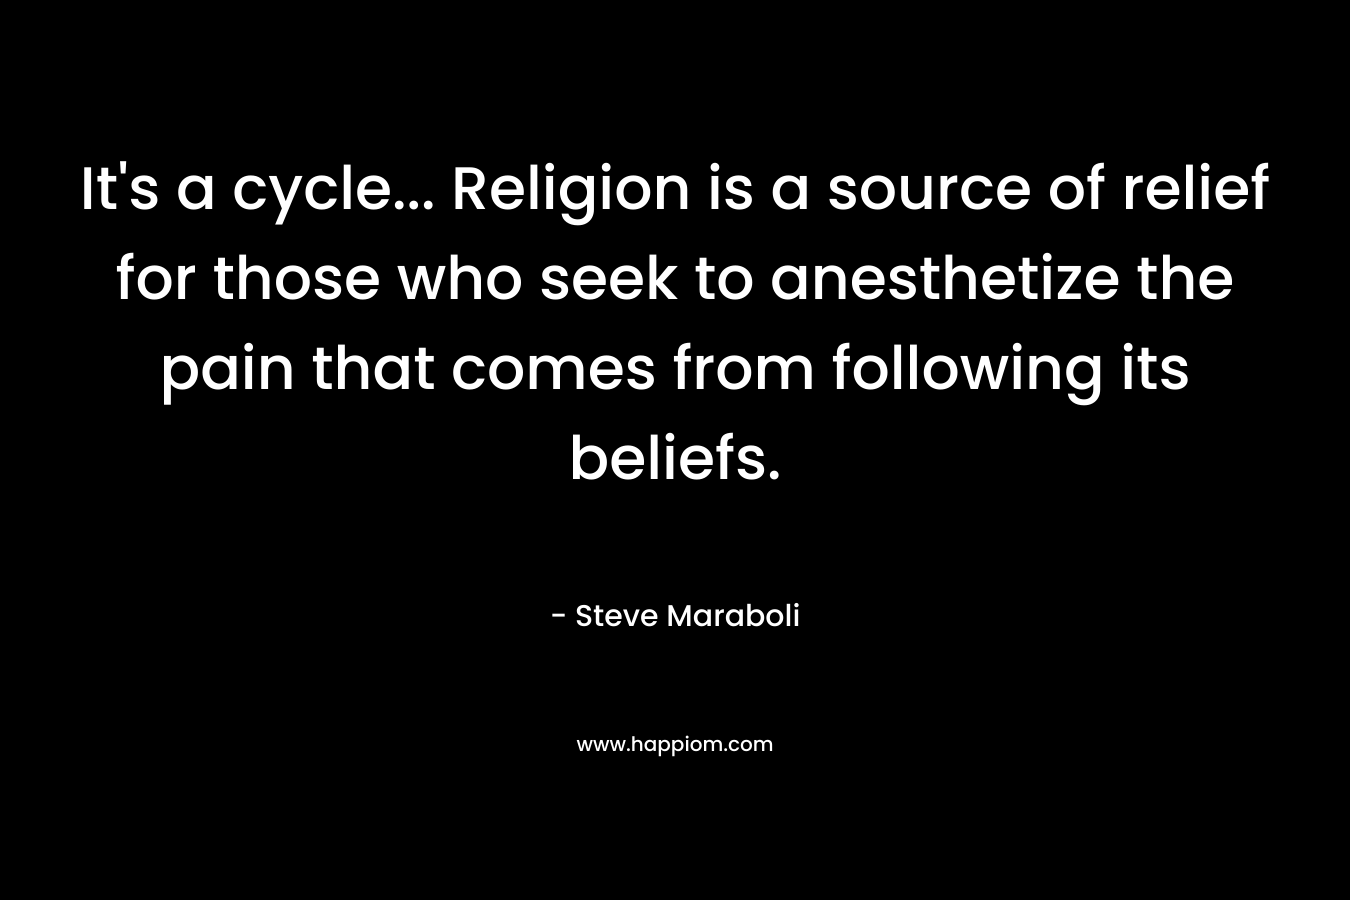 It’s a cycle… Religion is a source of relief for those who seek to anesthetize the pain that comes from following its beliefs. – Steve Maraboli